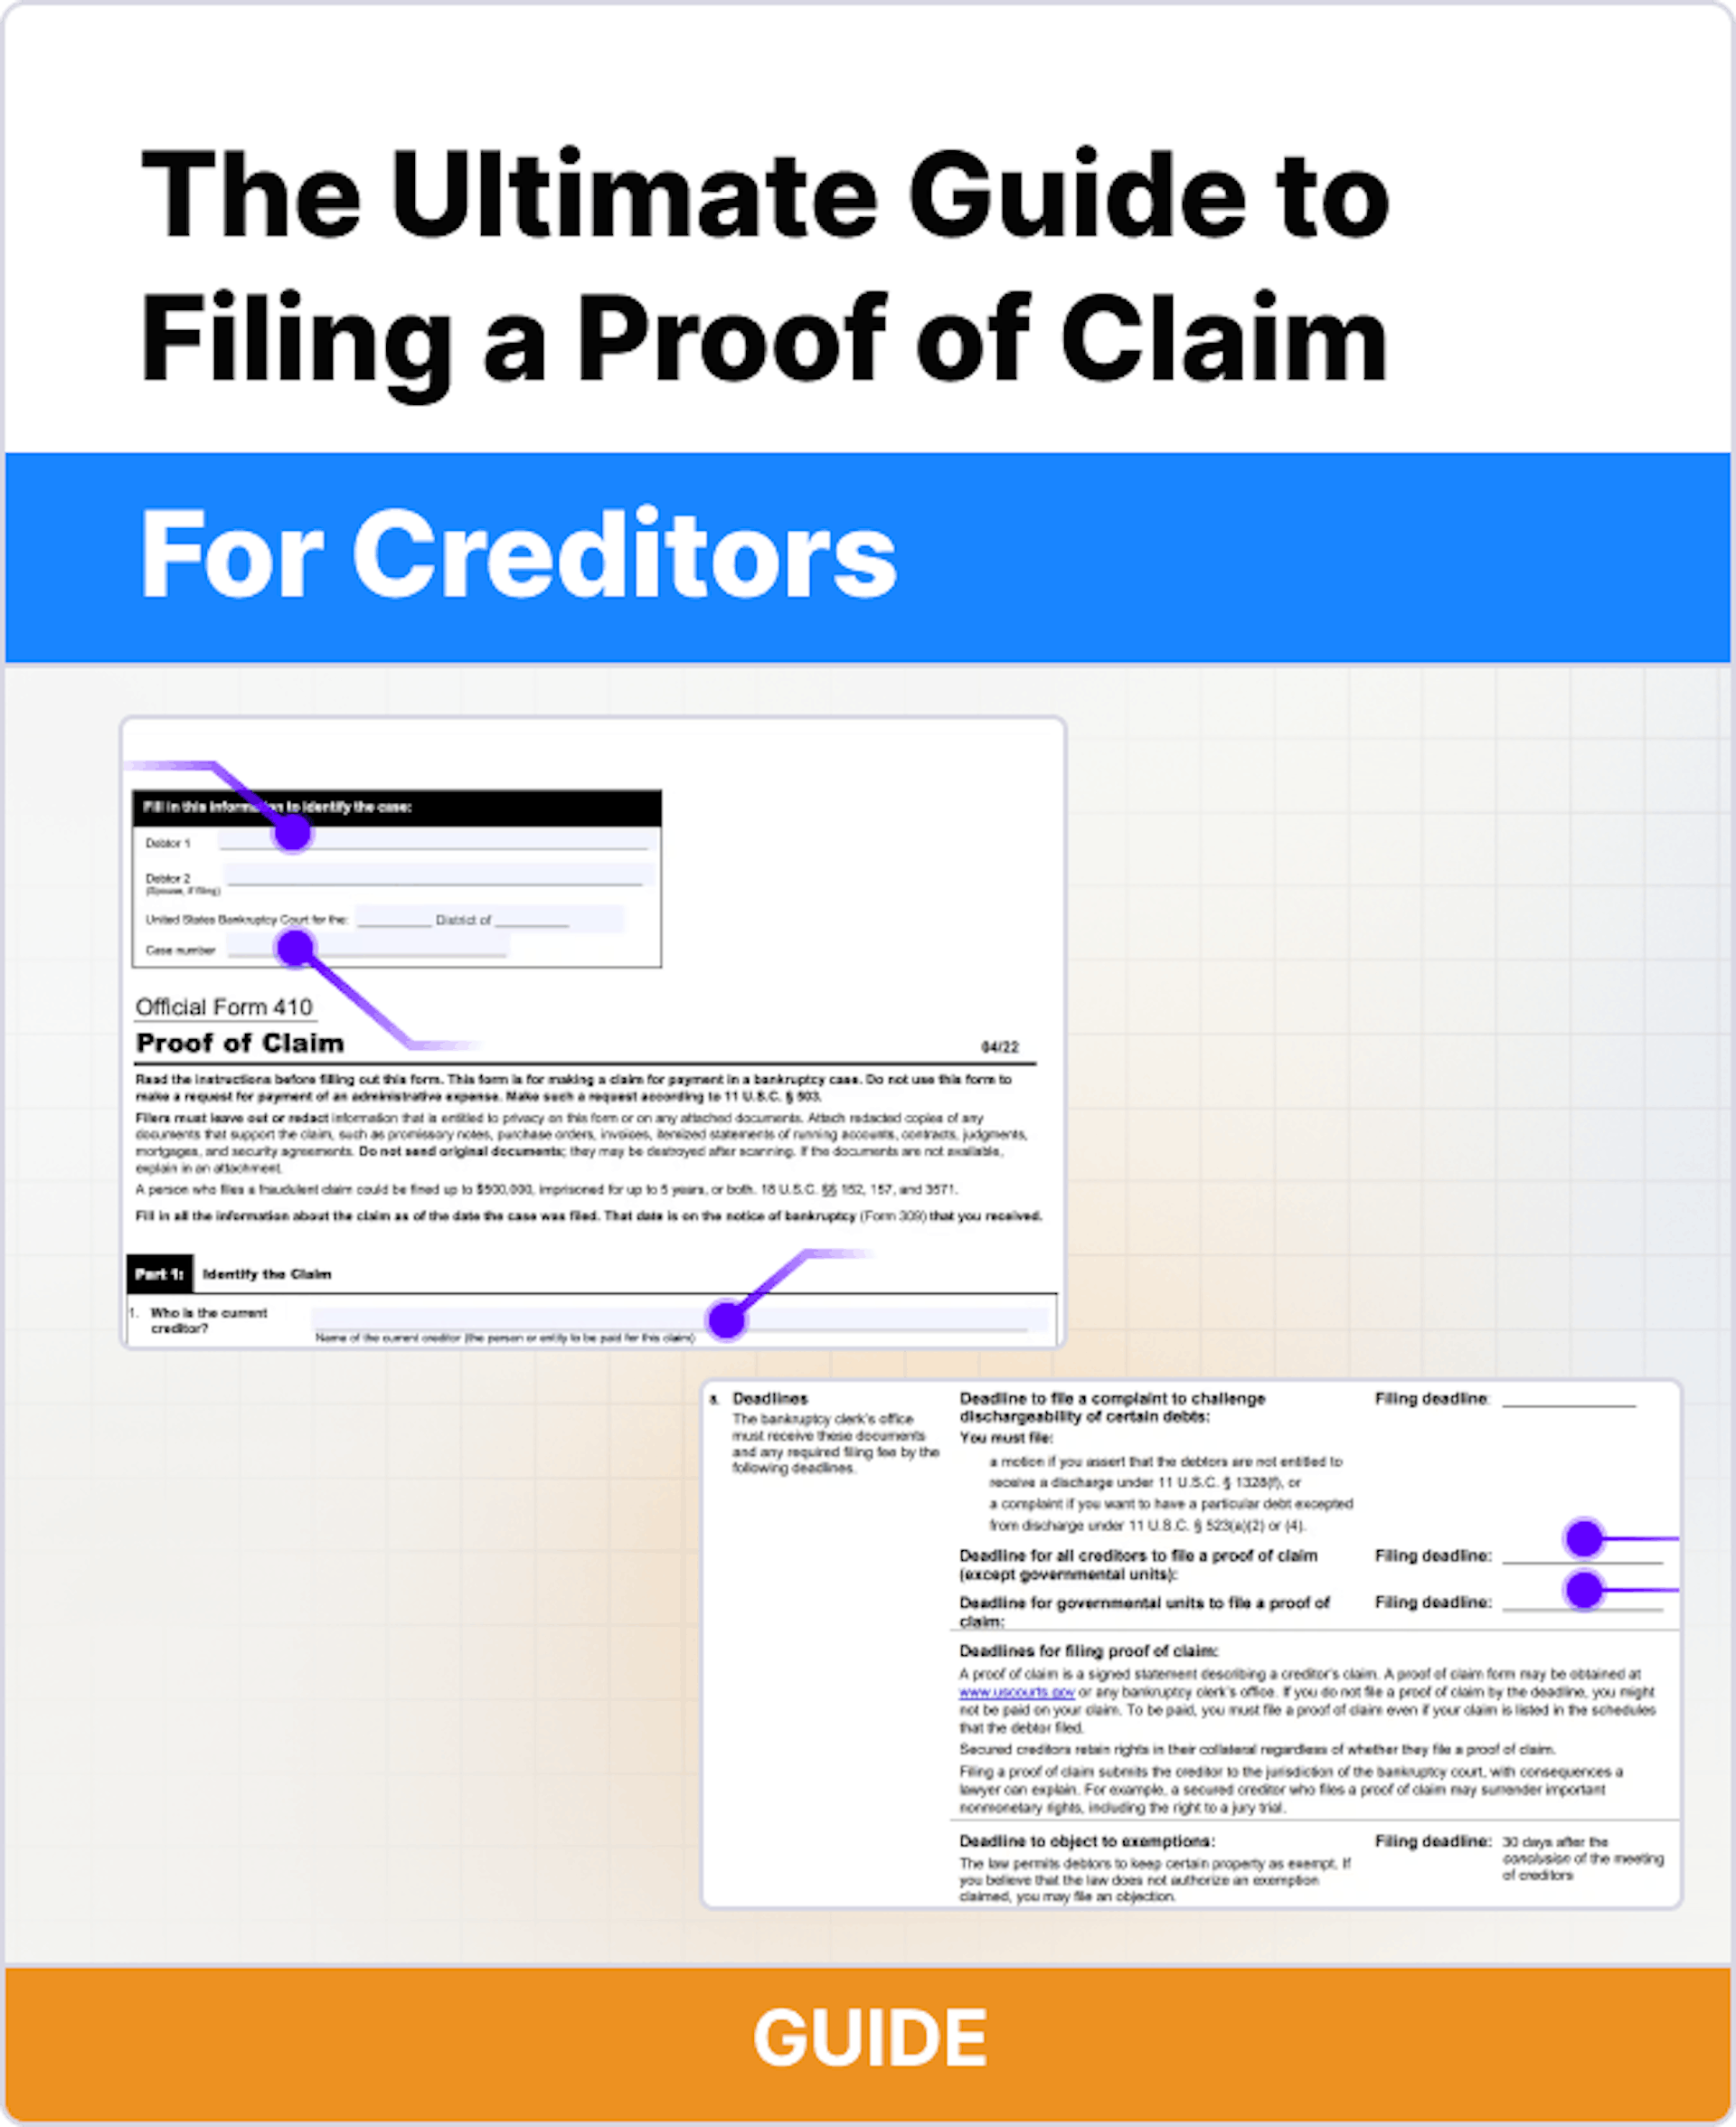 The Guide to Filing a Proof of Claim